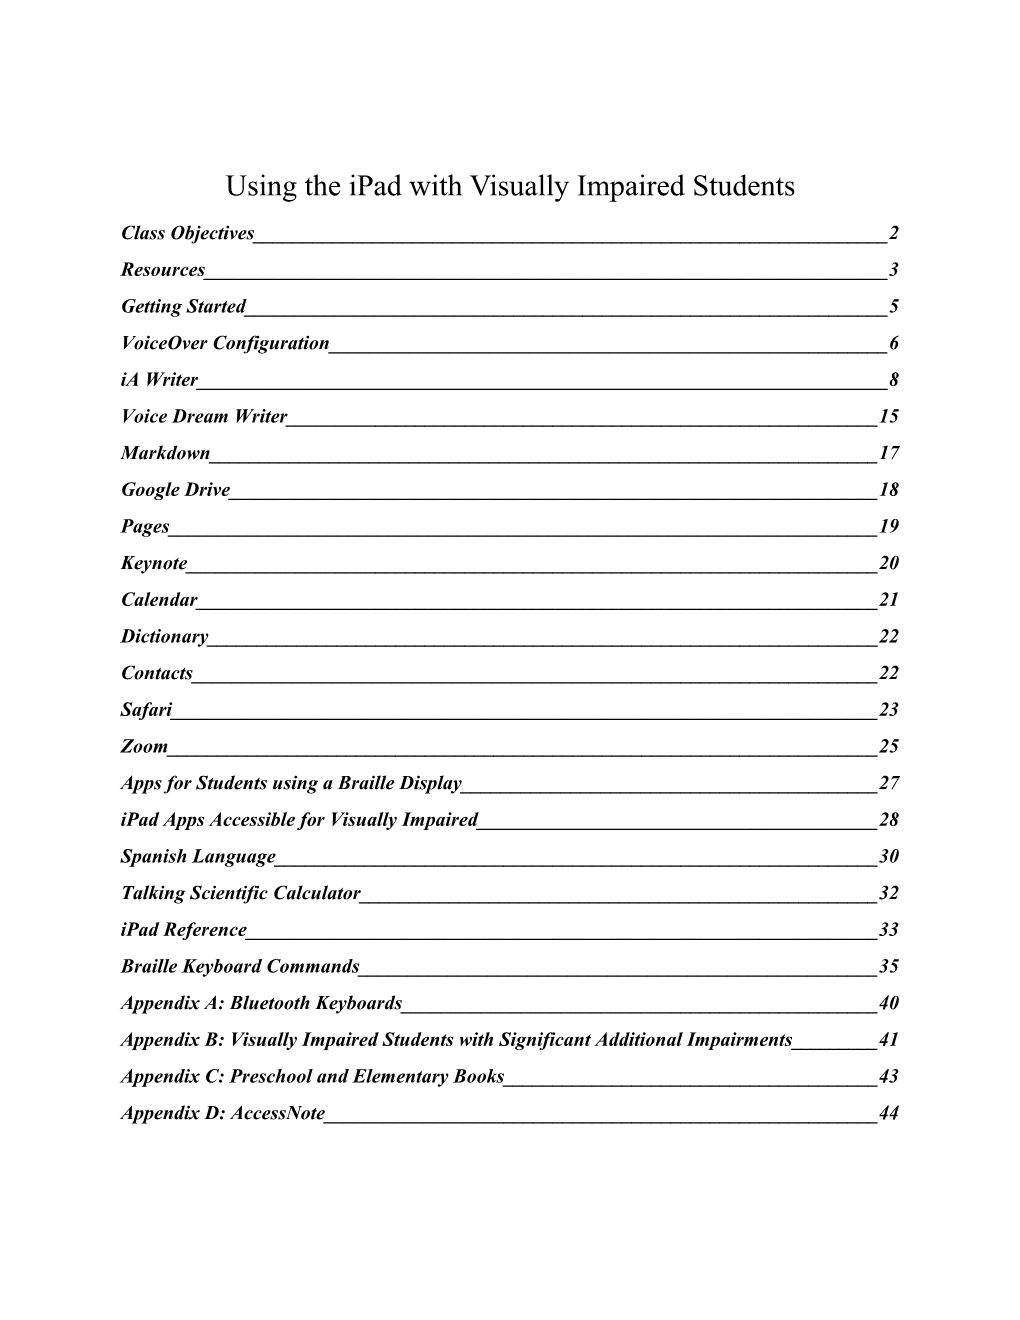 Using the Ipad with Visually Impaired Students